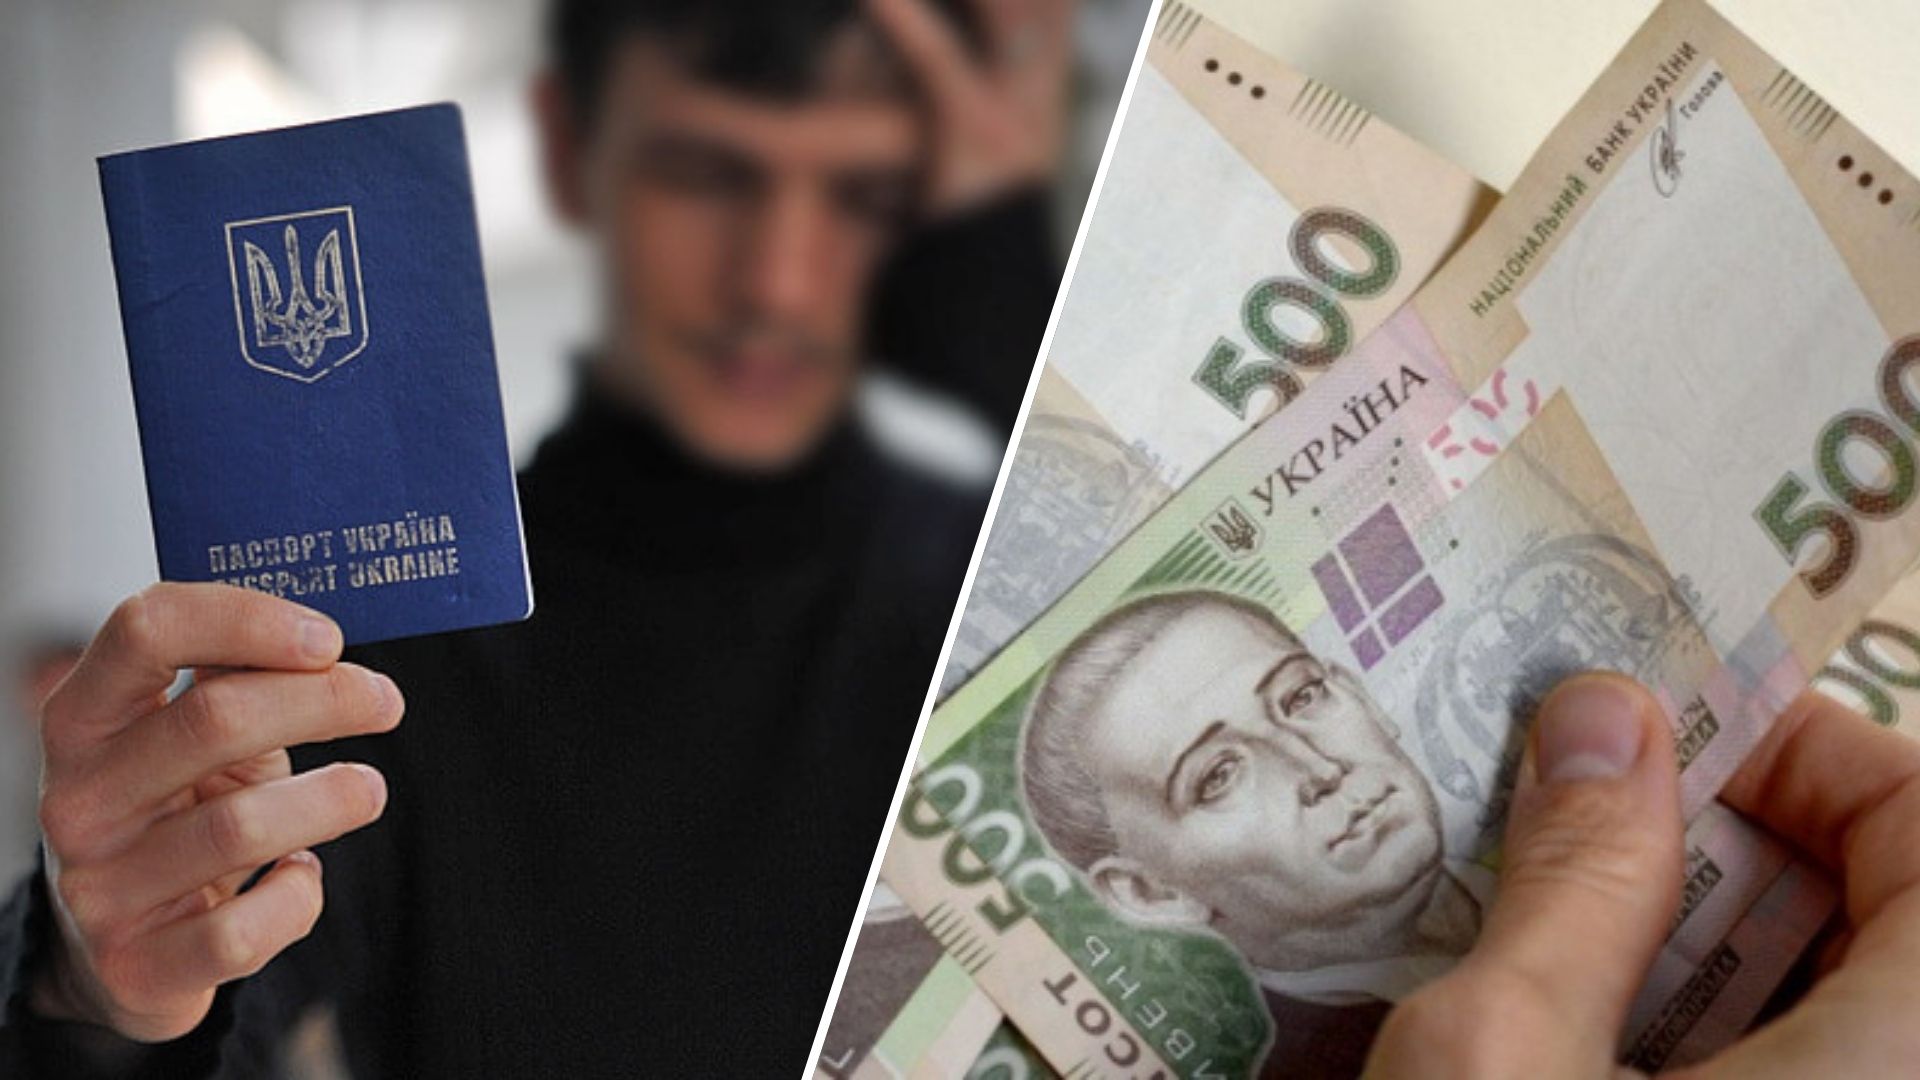 From April 1 this year, the price of issuing a passport will increase.